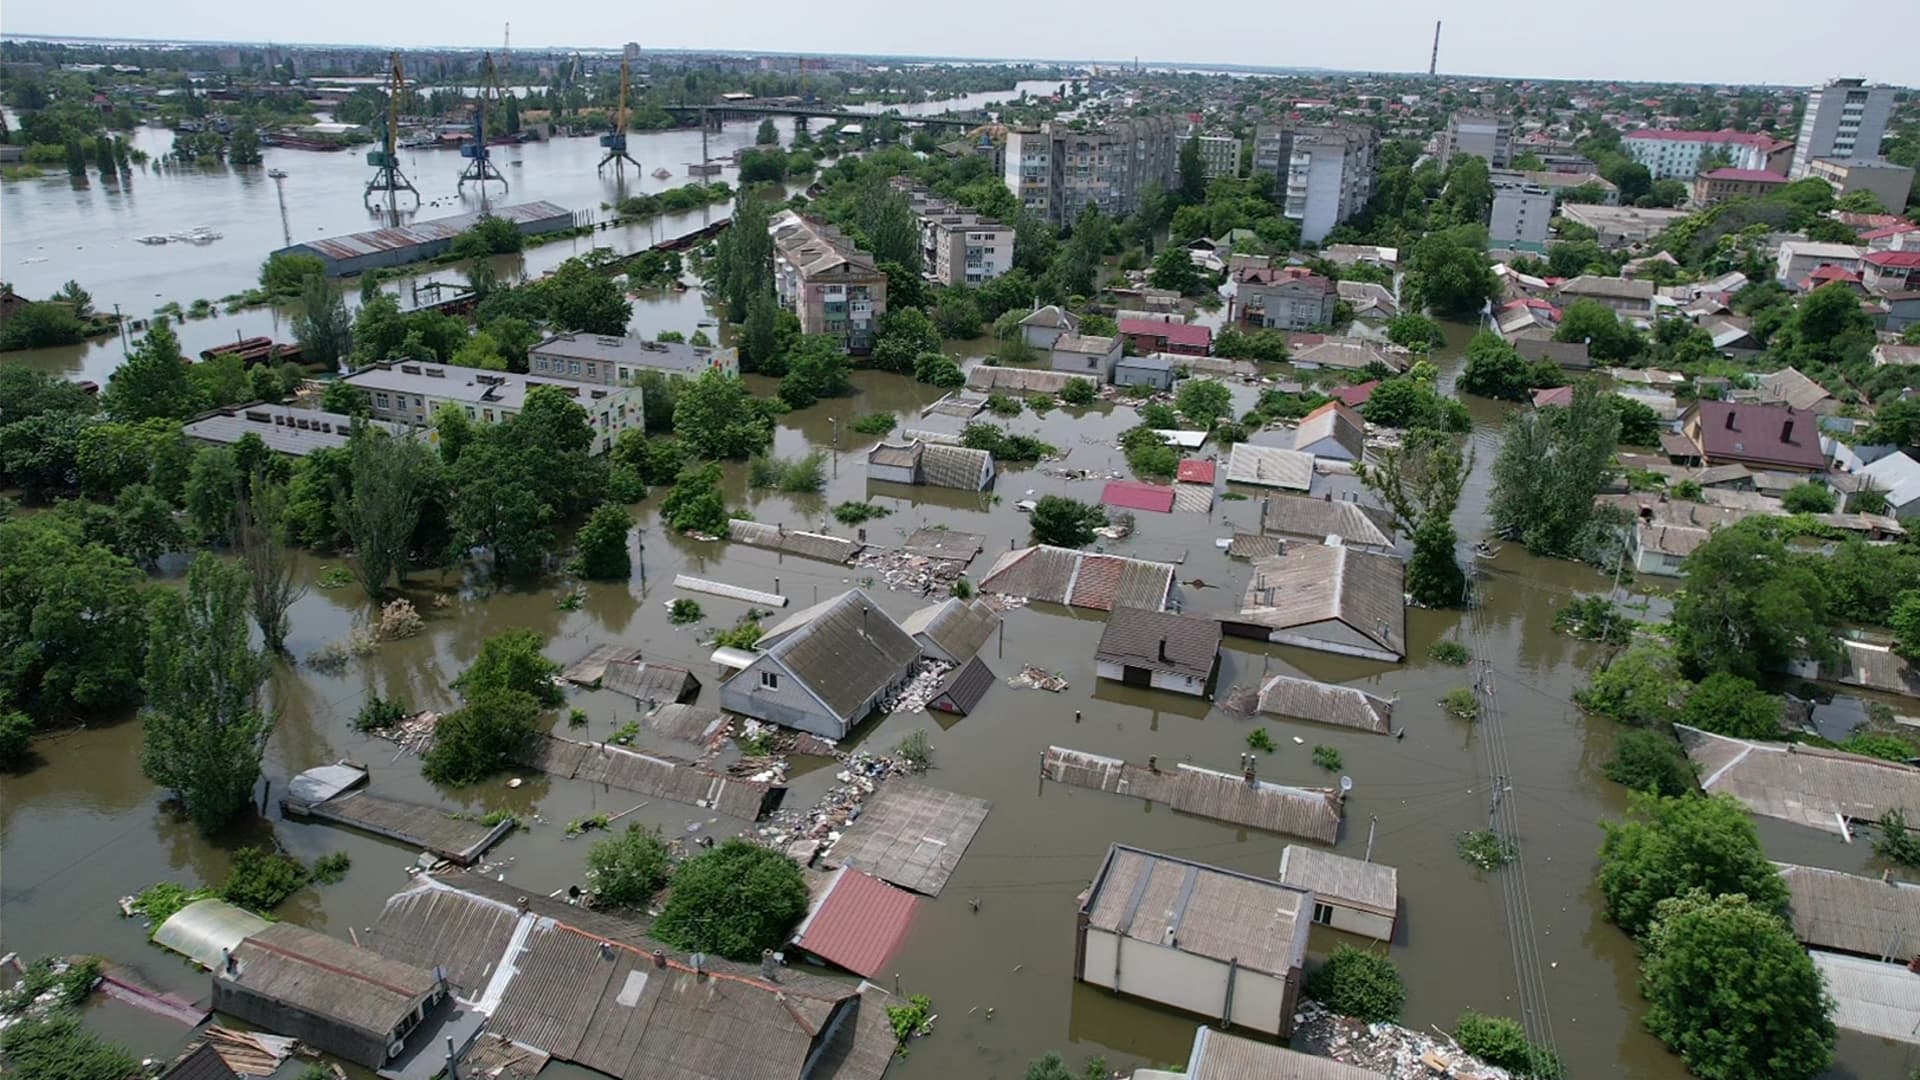 Residential buildings in a flooded area on June 8, 2023 in Kherson, Ukraine. Early Tuesday, the Kakhovka dam and hydroelectric power plant, which sits on the Dnipro river in the southern Kherson region, was destroyed, forcing downstream communities to evacuate due to the risk of flooding. 